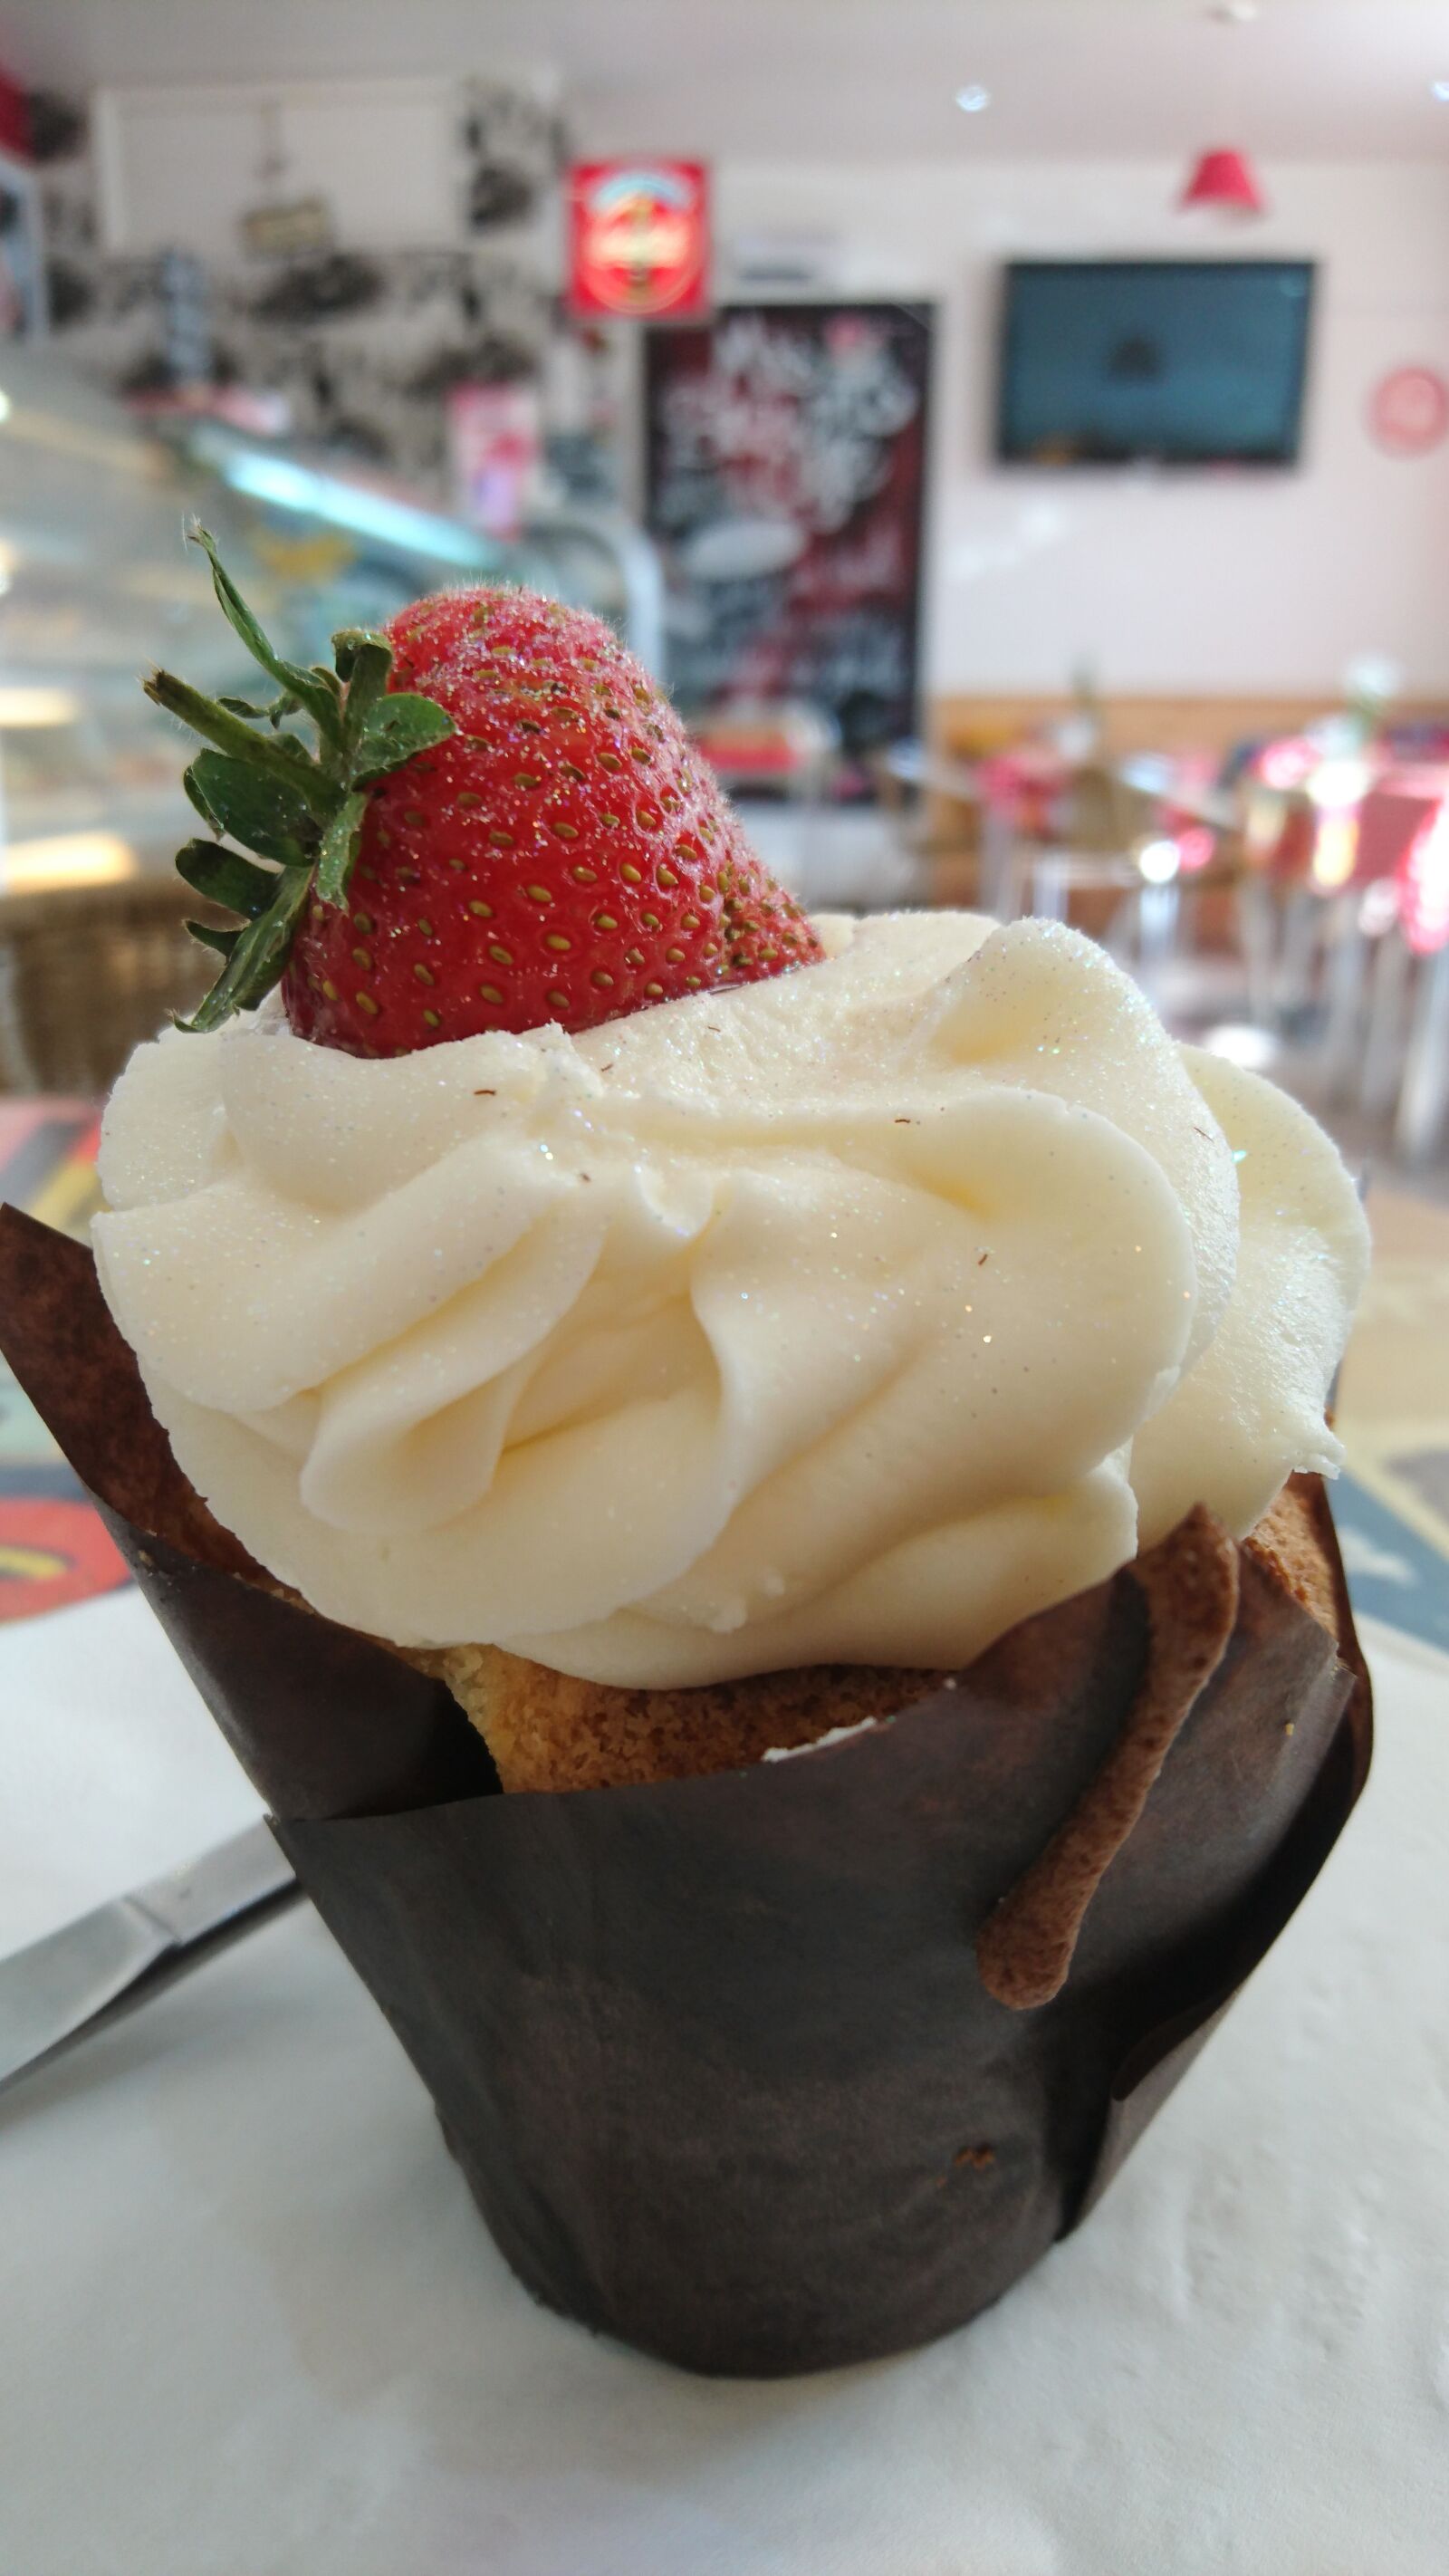 Sony Xperia Z5 Compact sample photo. Muffin, cake, strawberry photography